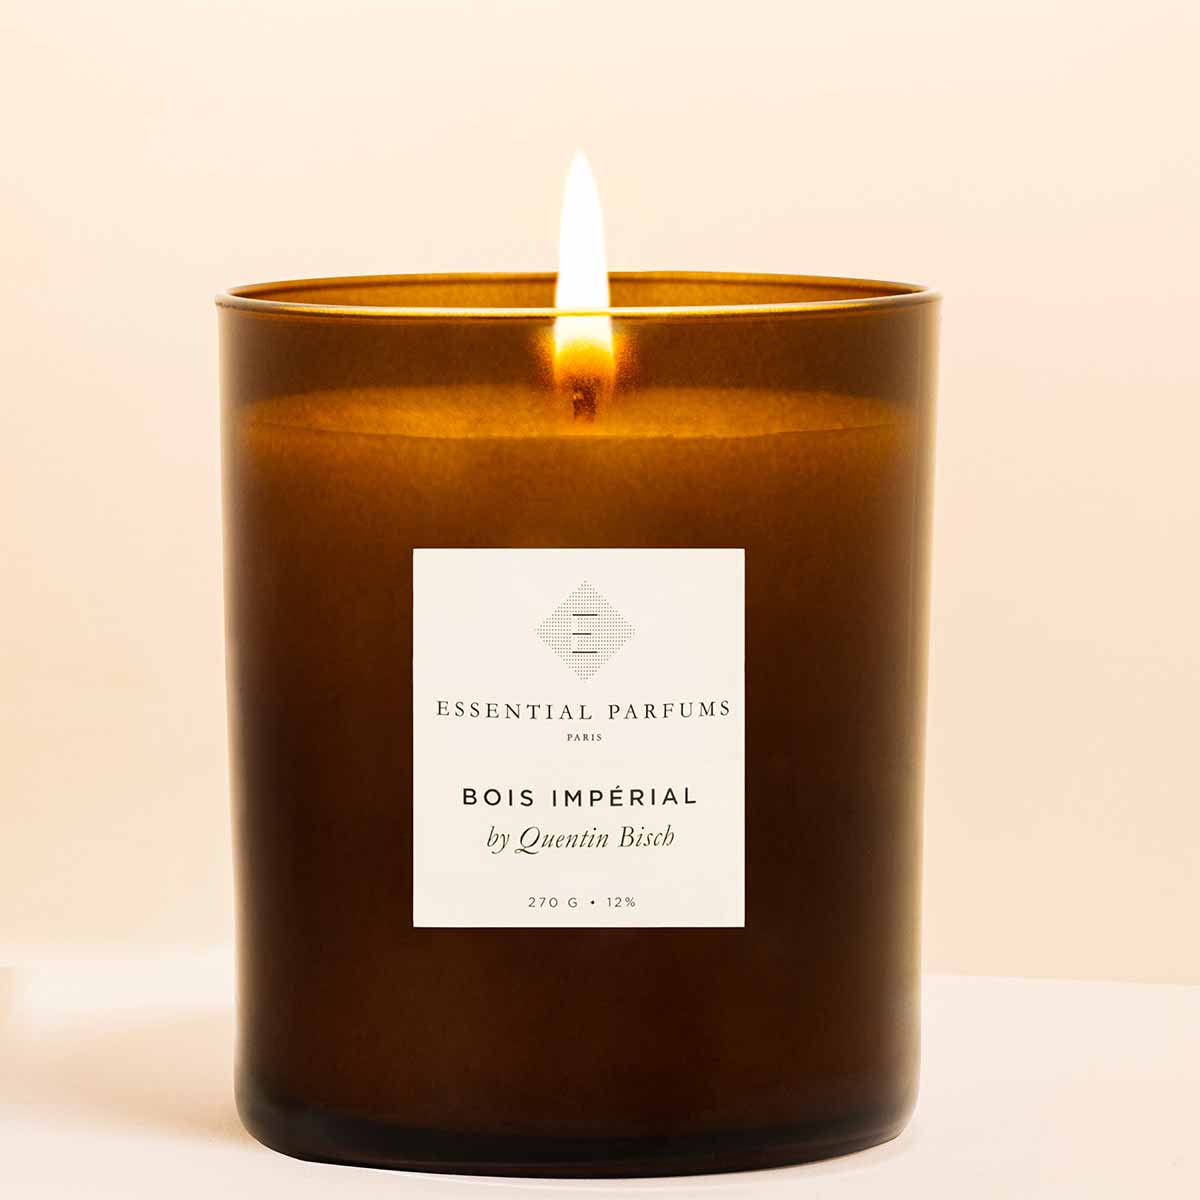 ESSENTIAL PARFUMS - BOIS IMPERIAL CANDLE